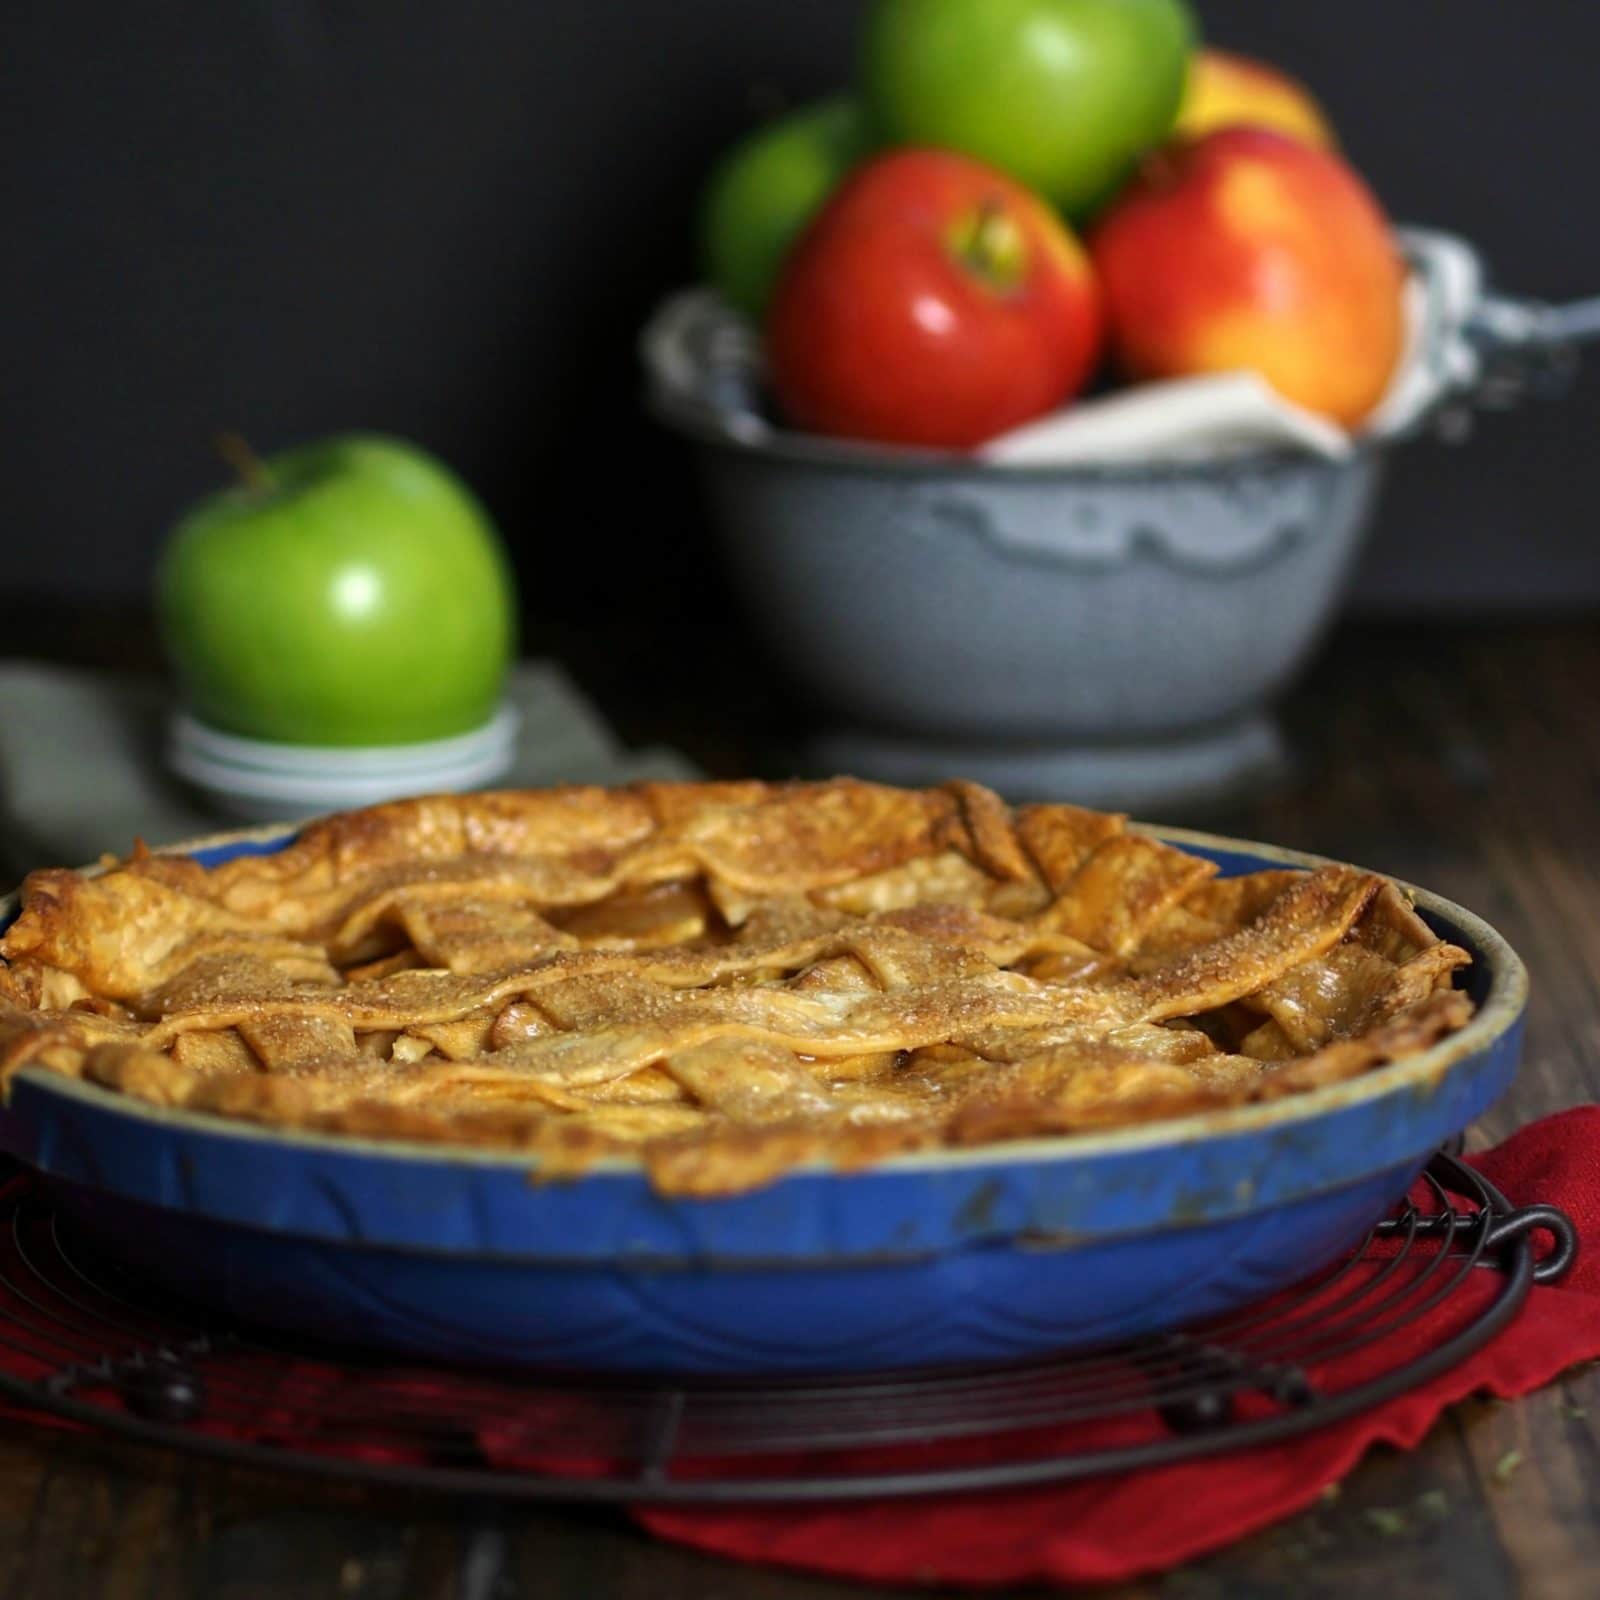 Salted Caramel Apple Tart (made the easy way) with store-bought Salted Caramel Sauce & pie crust is as easy as can be. Sweet/salty/delicious. Simply Sated